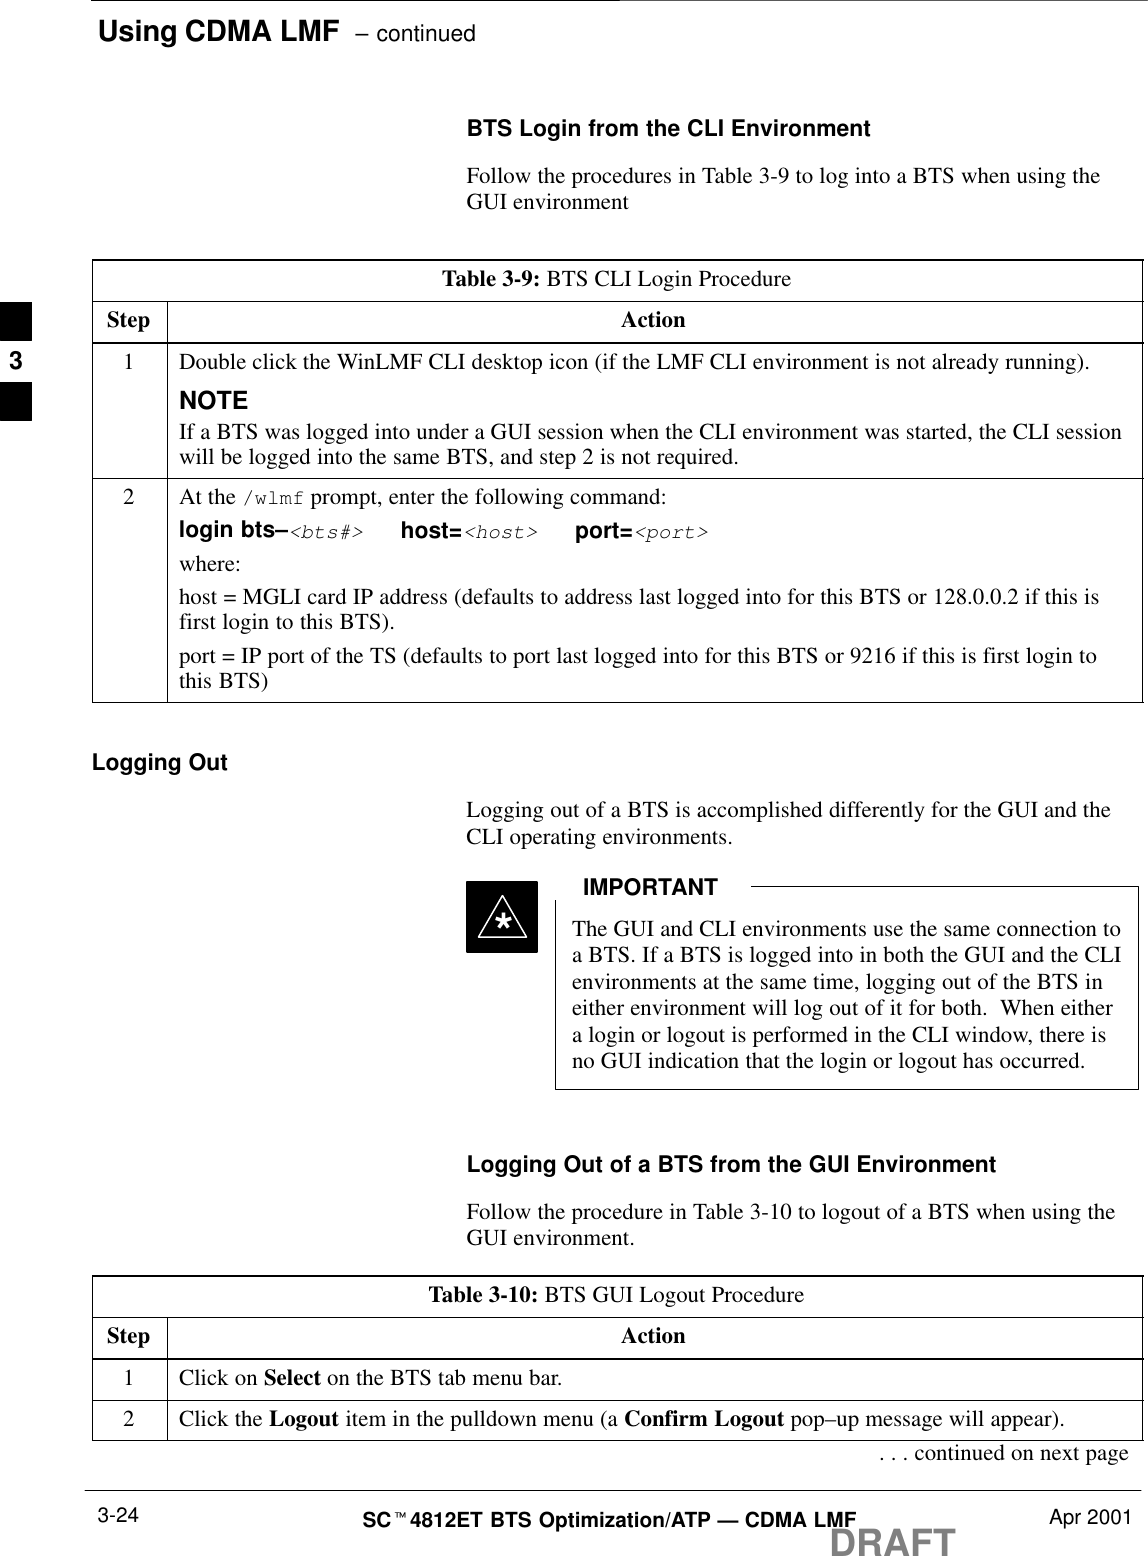 Using CDMA LMF  – continuedDRAFTSCt4812ET BTS Optimization/ATP — CDMA LMF Apr 20013-24BTS Login from the CLI EnvironmentFollow the procedures in Table 3-9 to log into a BTS when using theGUI environmentTable 3-9: BTS CLI Login ProcedureStep Action1Double click the WinLMF CLI desktop icon (if the LMF CLI environment is not already running).NOTEIf a BTS was logged into under a GUI session when the CLI environment was started, the CLI sessionwill be logged into the same BTS, and step 2 is not required.2At the /wlmf prompt, enter the following command:login bts–&lt;bts#&gt;   host=&lt;host&gt;   port=&lt;port&gt;where:host = MGLI card IP address (defaults to address last logged into for this BTS or 128.0.0.2 if this isfirst login to this BTS).port = IP port of the TS (defaults to port last logged into for this BTS or 9216 if this is first login tothis BTS)Logging OutLogging out of a BTS is accomplished differently for the GUI and theCLI operating environments.The GUI and CLI environments use the same connection toa BTS. If a BTS is logged into in both the GUI and the CLIenvironments at the same time, logging out of the BTS ineither environment will log out of it for both.  When eithera login or logout is performed in the CLI window, there isno GUI indication that the login or logout has occurred.IMPORTANT*Logging Out of a BTS from the GUI EnvironmentFollow the procedure in Table 3-10 to logout of a BTS when using theGUI environment.Table 3-10: BTS GUI Logout ProcedureStep Action1Click on Select on the BTS tab menu bar.2Click the Logout item in the pulldown menu (a Confirm Logout pop–up message will appear).. . . continued on next page3